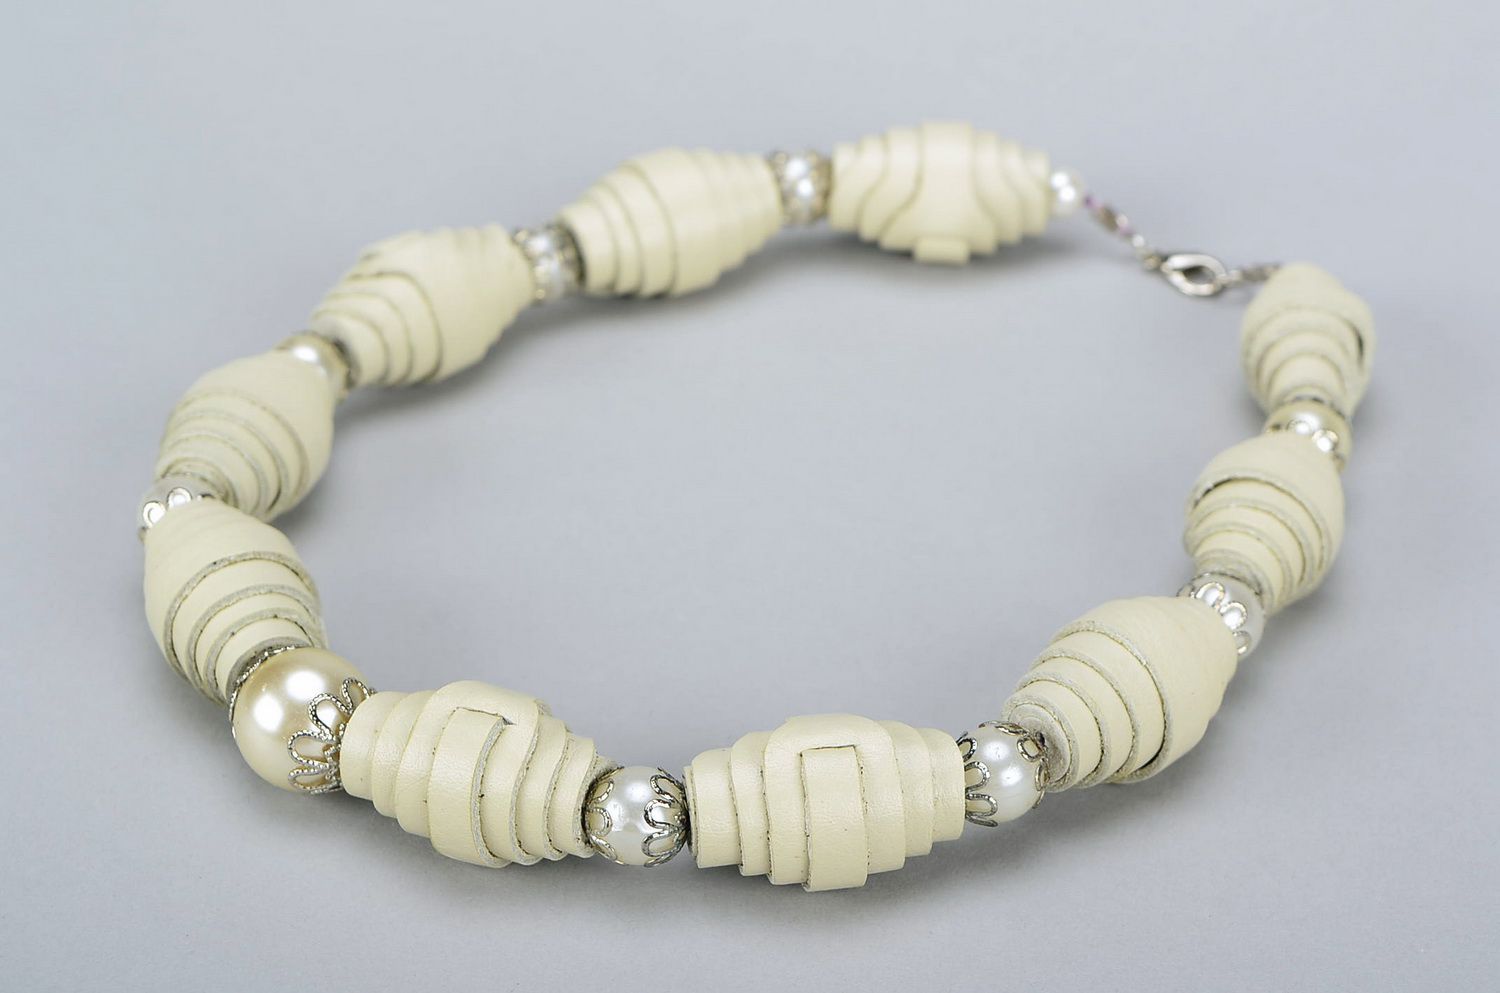 Beige beads made of natural leather photo 1